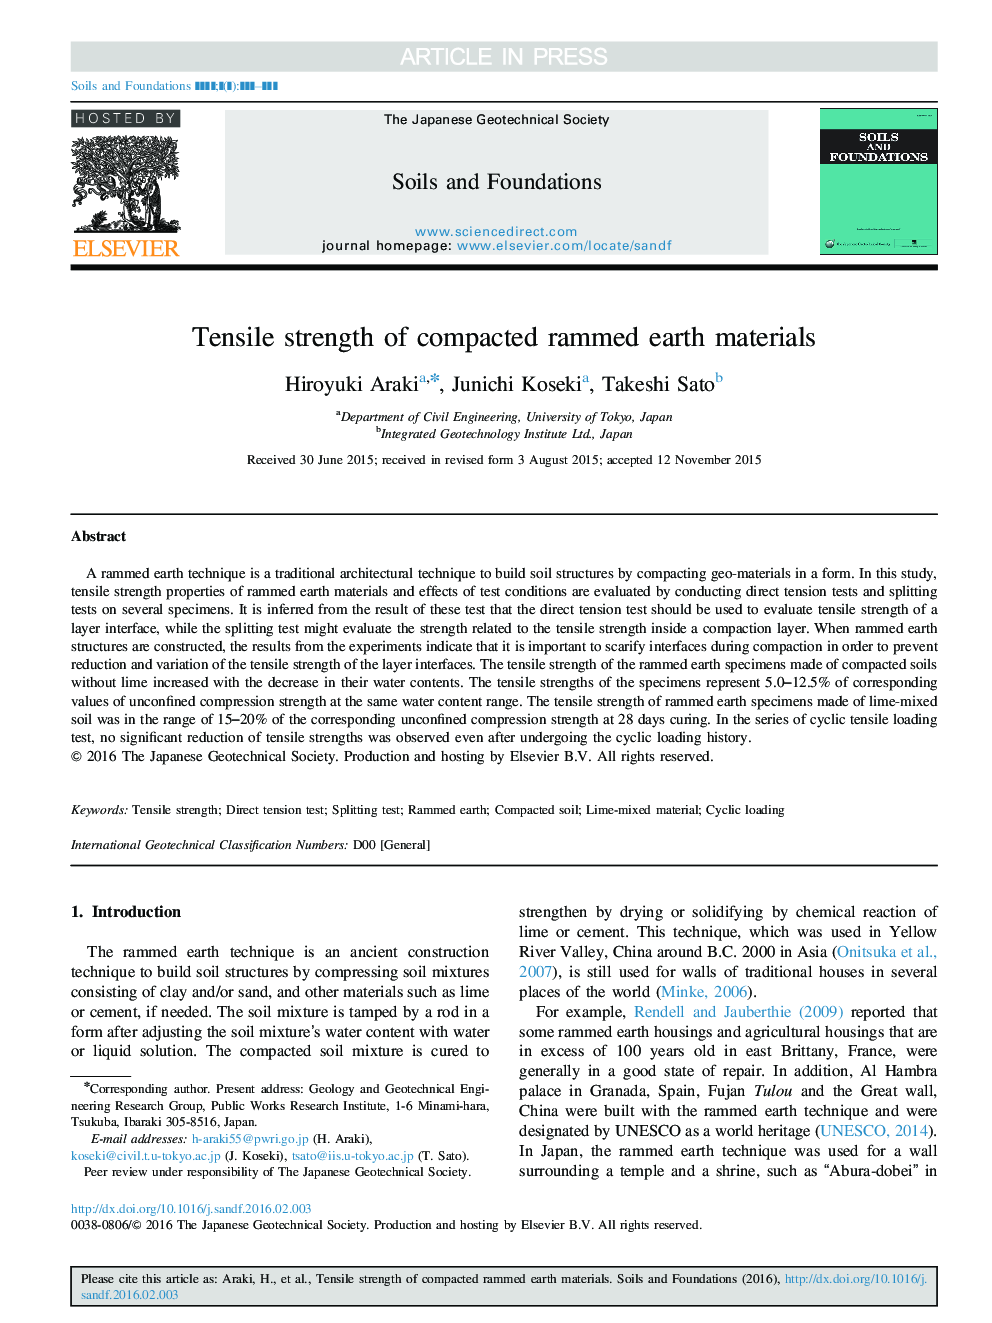 Tensile strength of compacted rammed earth materials